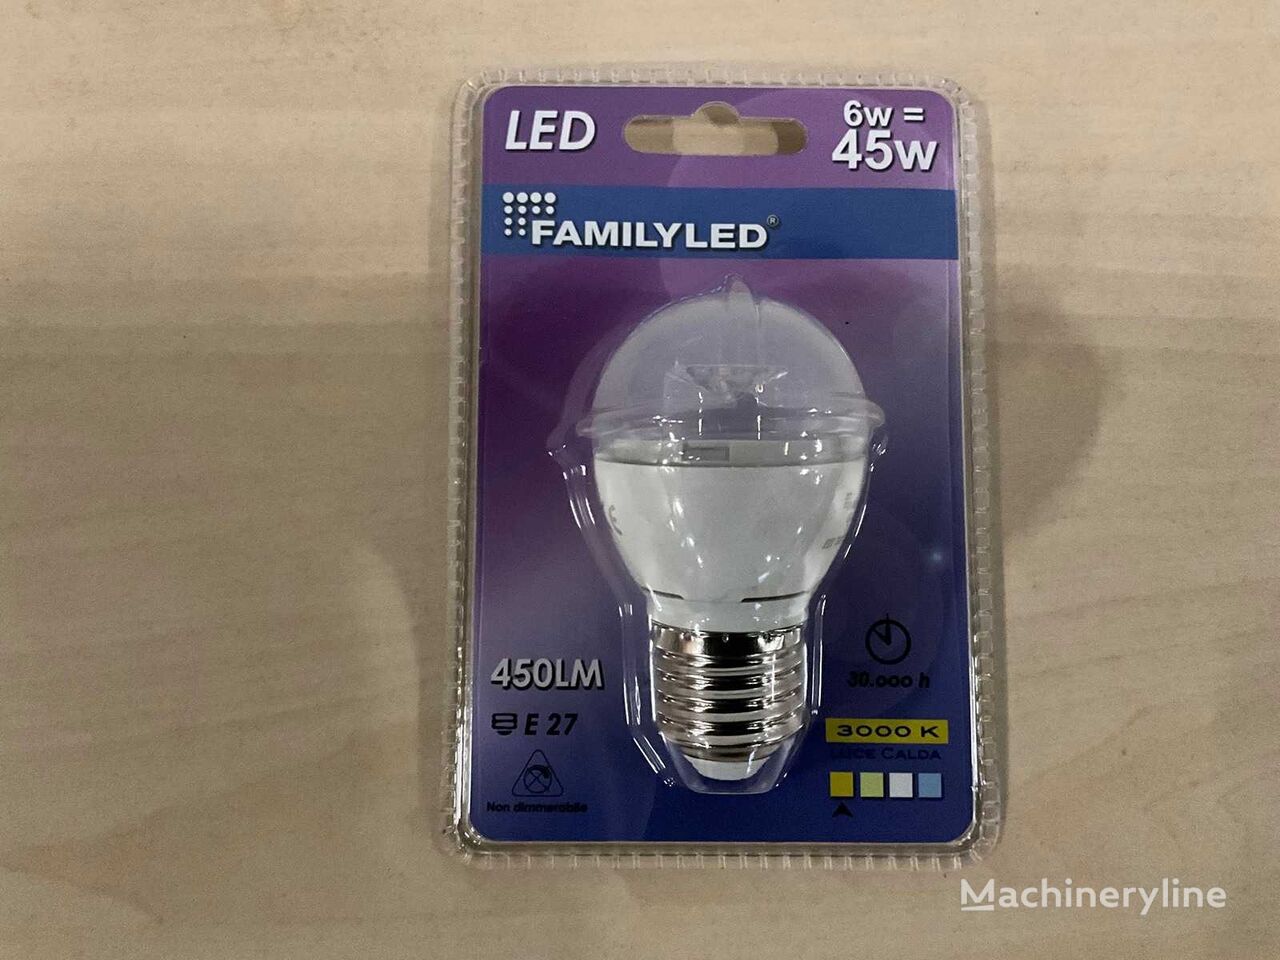 Familyled FLG4563B electrical accessories